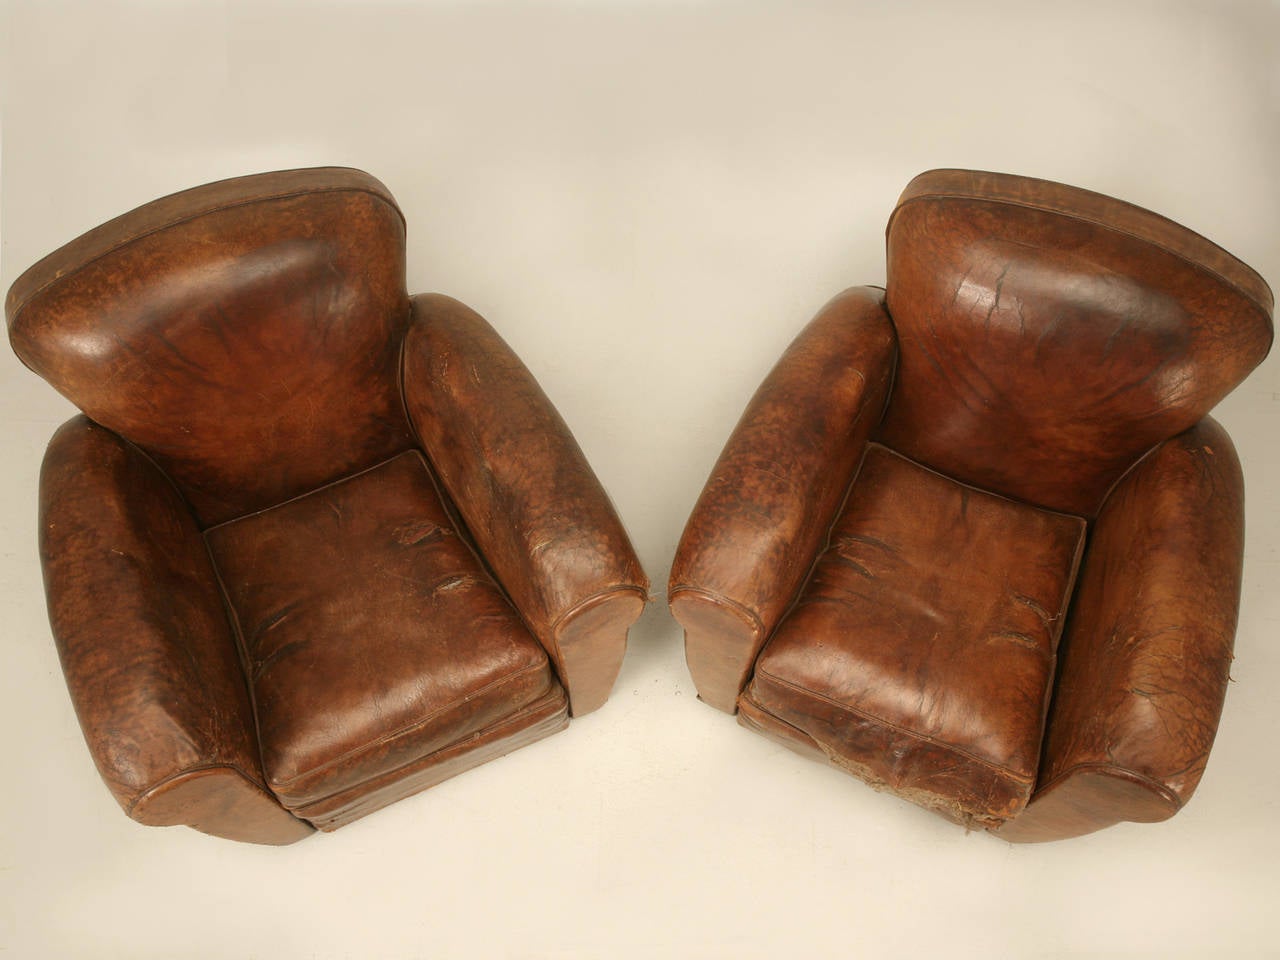 French Art Deco Leather Club Chairs, Unrestored 1